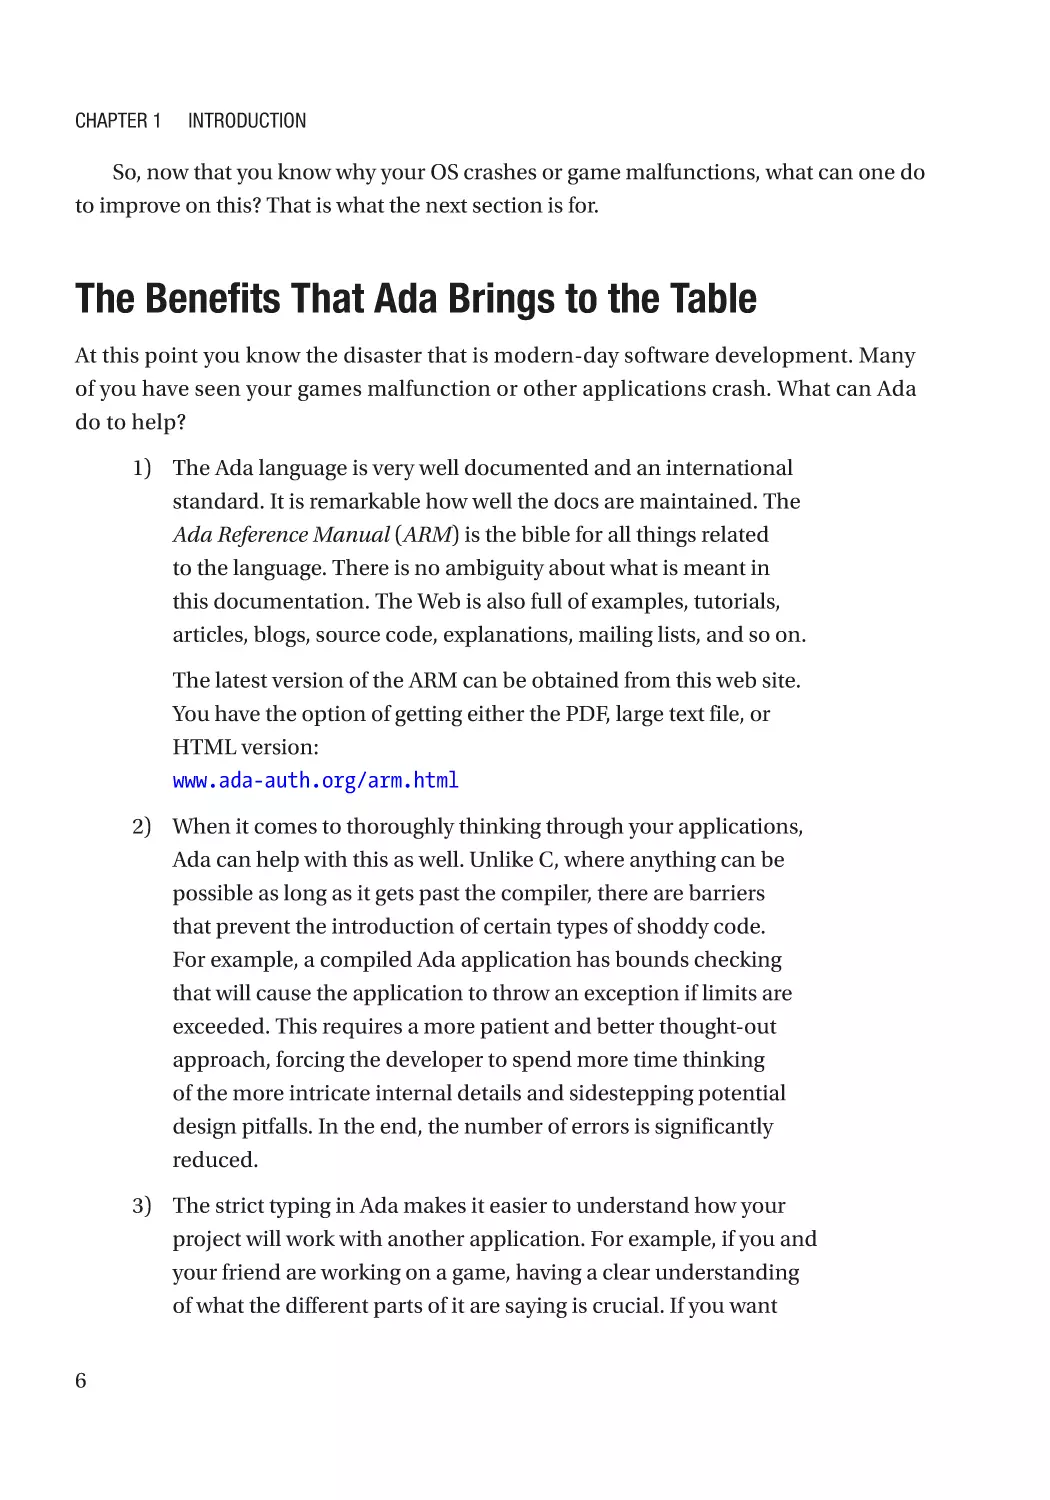 The Benefits That Ada Brings to the Table